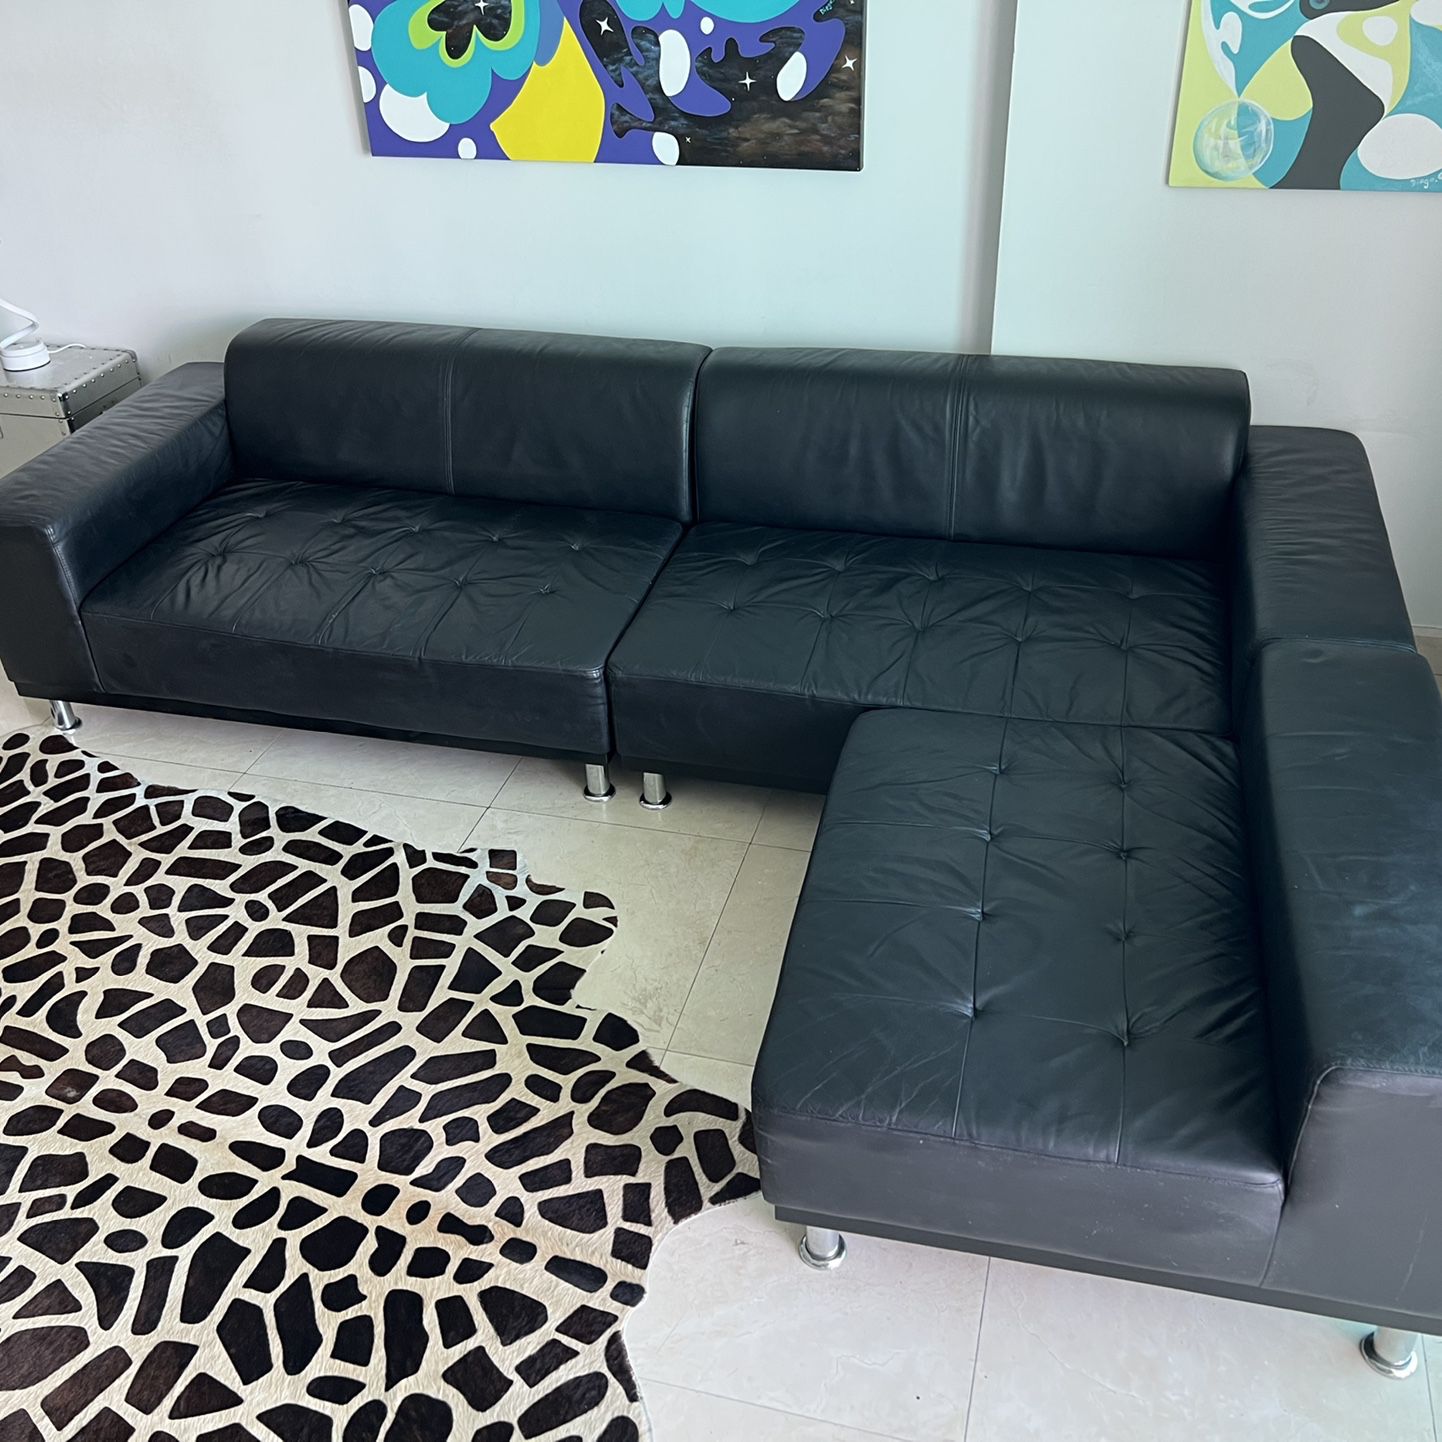 Black Leather Sectional $350 